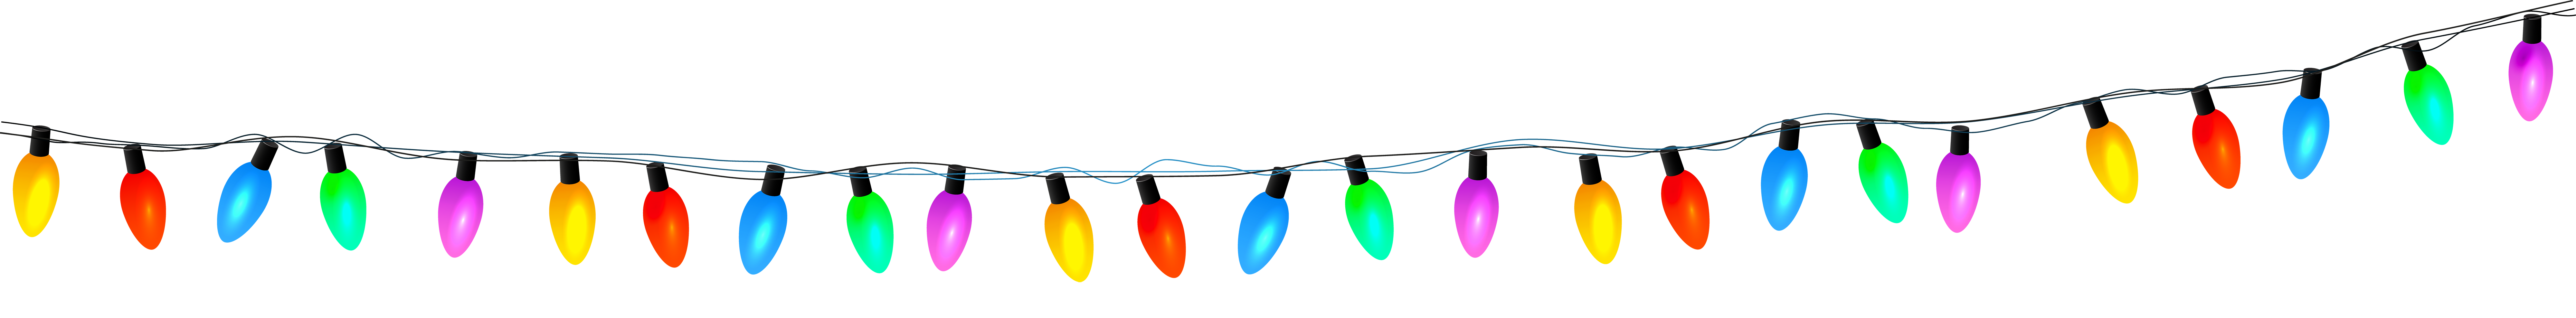 Free Christmas Lights Clipart Transparent Background, Download Free